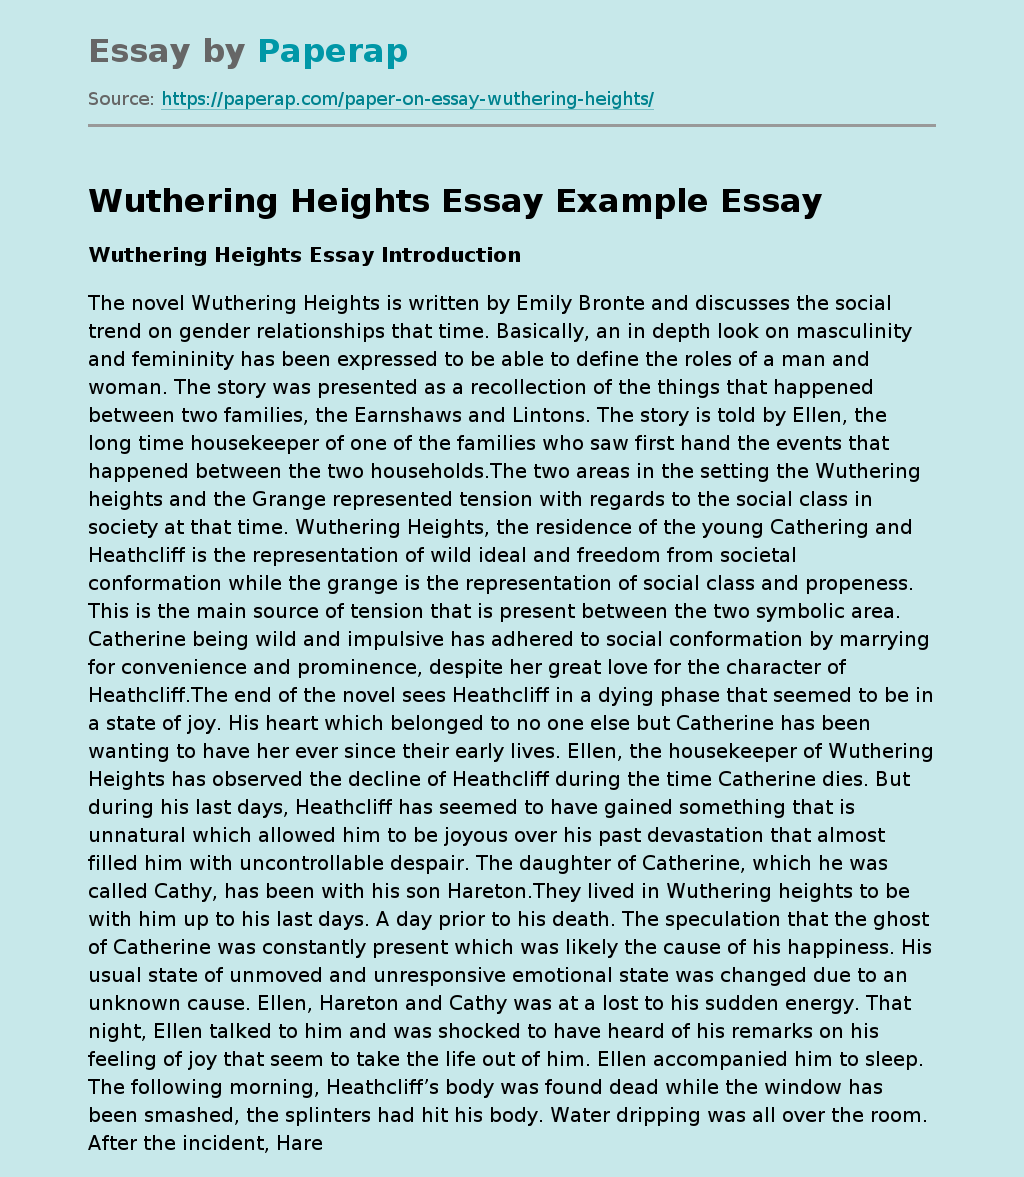 Wuthering Heights Is The Only Novel By English Writer Emily Brontë